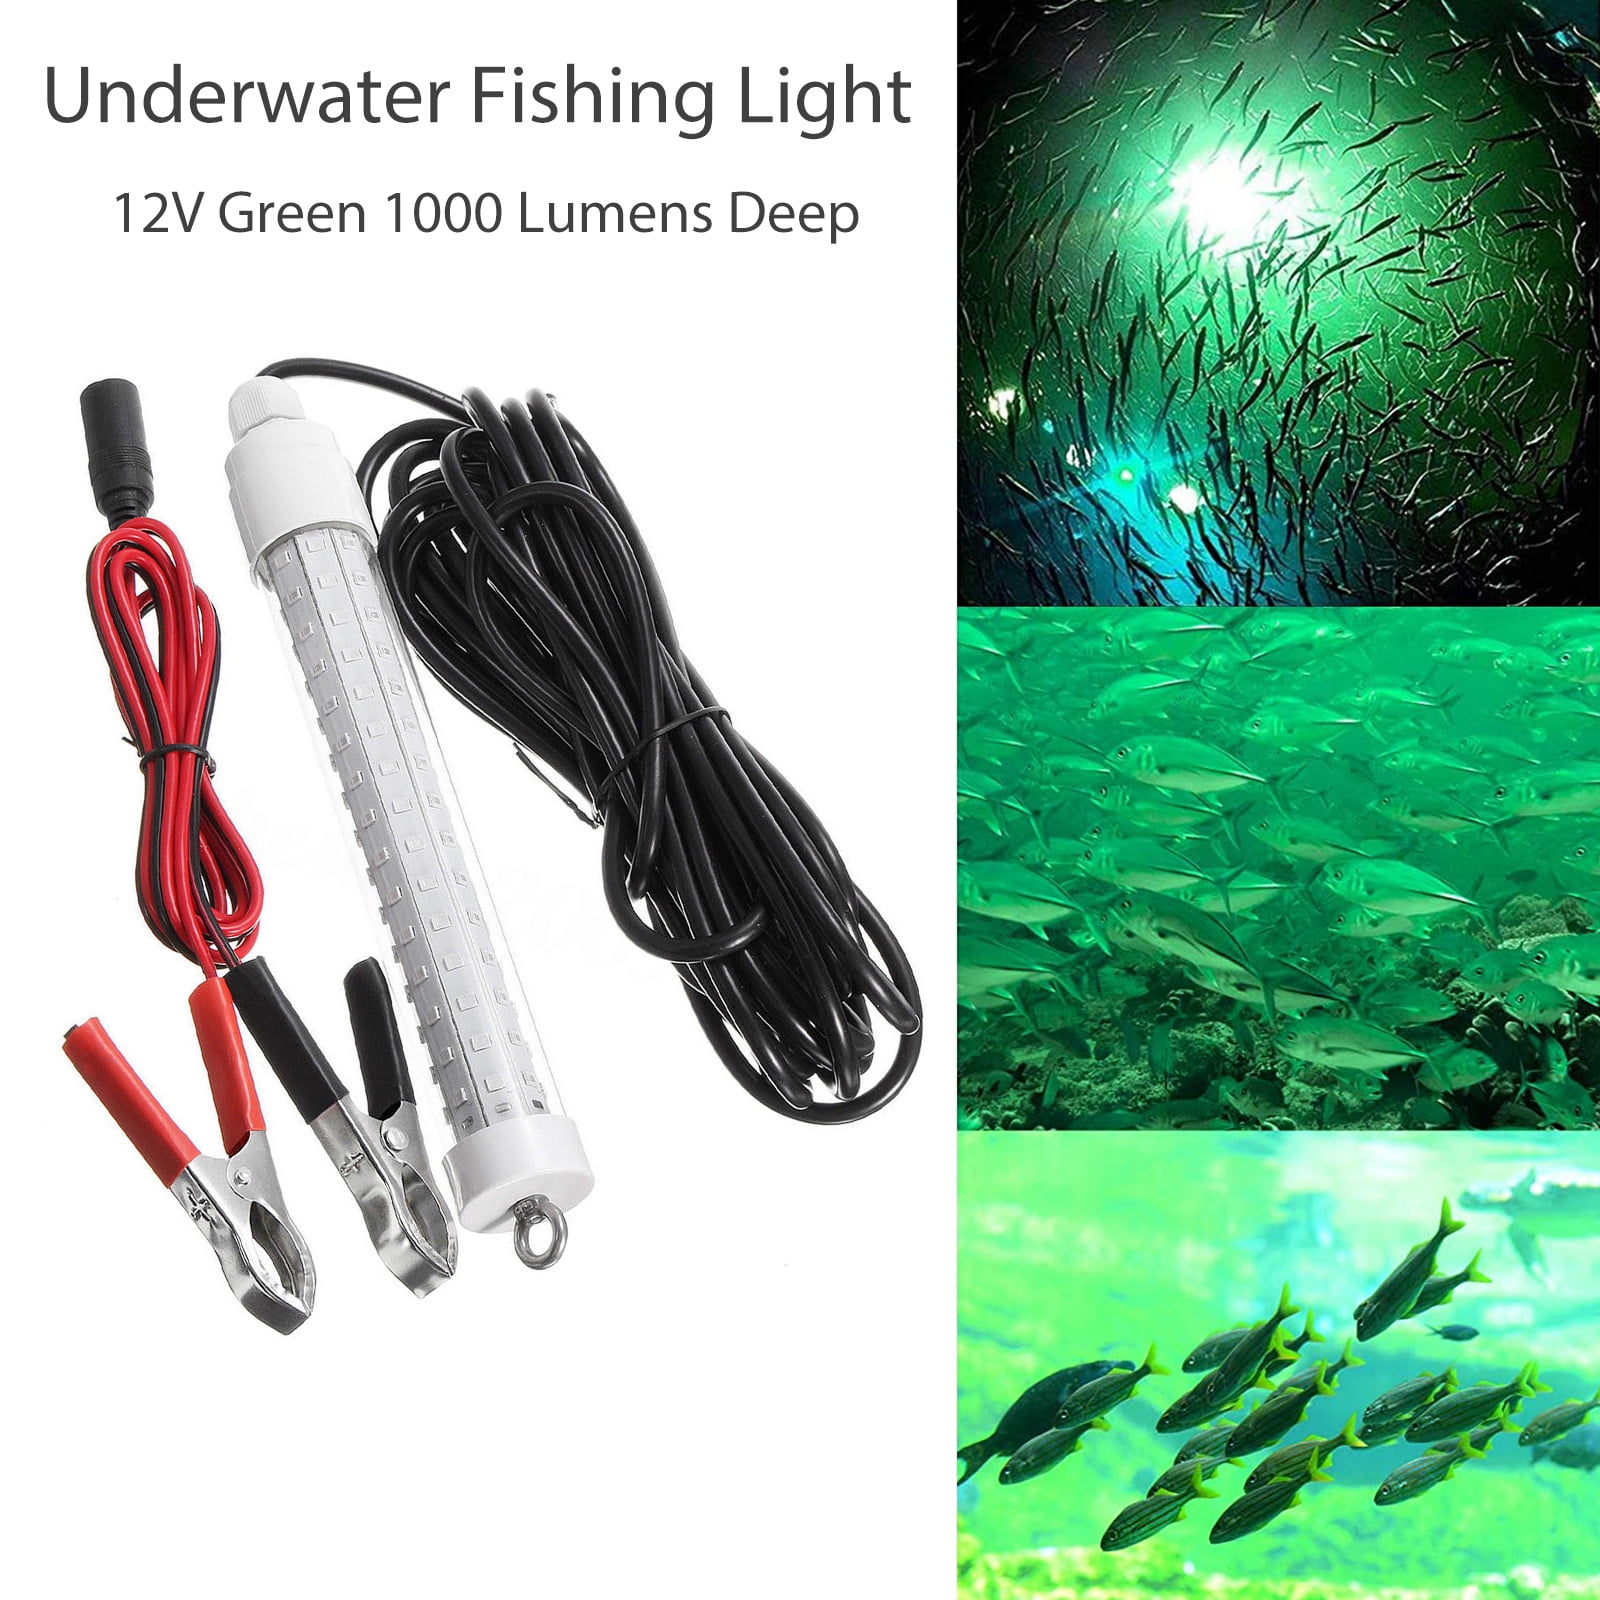 12V LED GREEN UNDERWATER SUBMERSIBLE NIGHT FISHING LIGHT crappie ice squid boat 